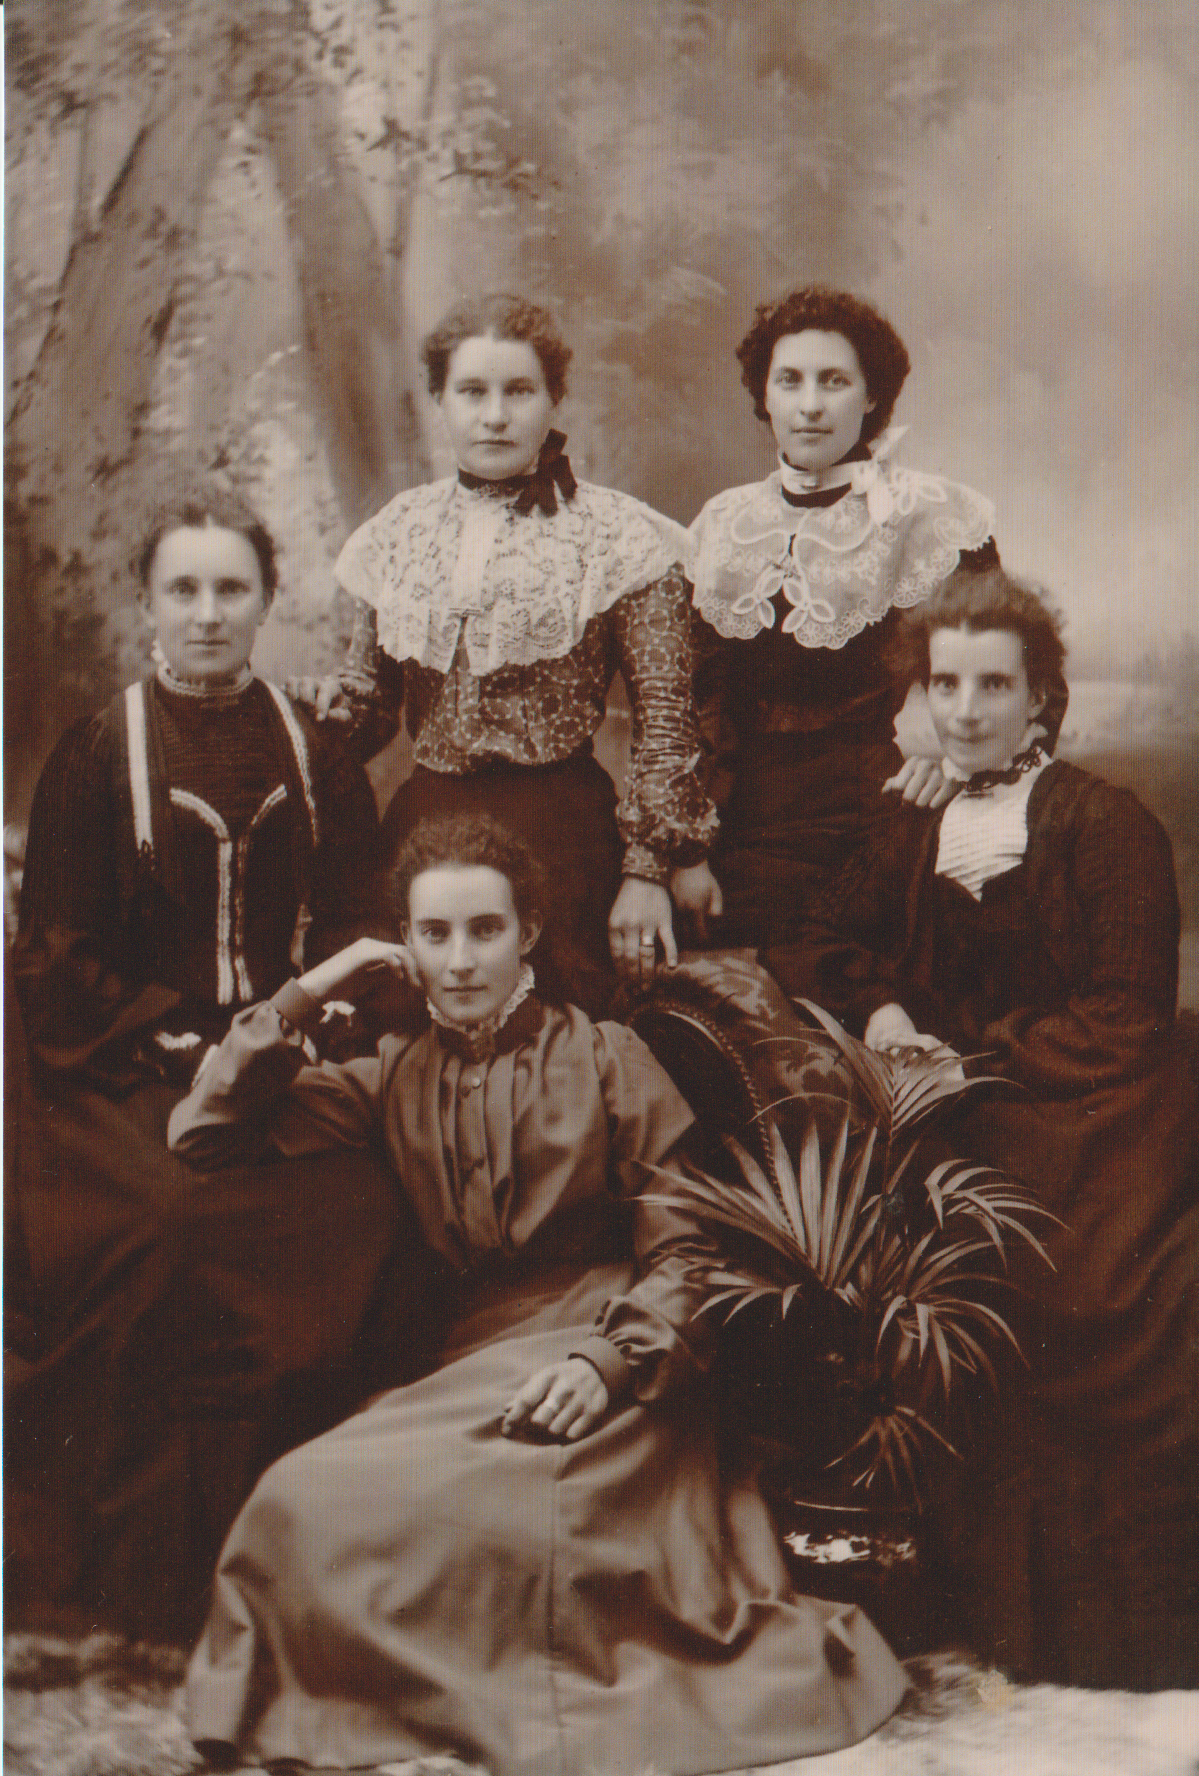 Studio portrait of five women in dark dresses. Three of the women are seated and the other two women are standing behind them. There is a flax plant in the foreground.